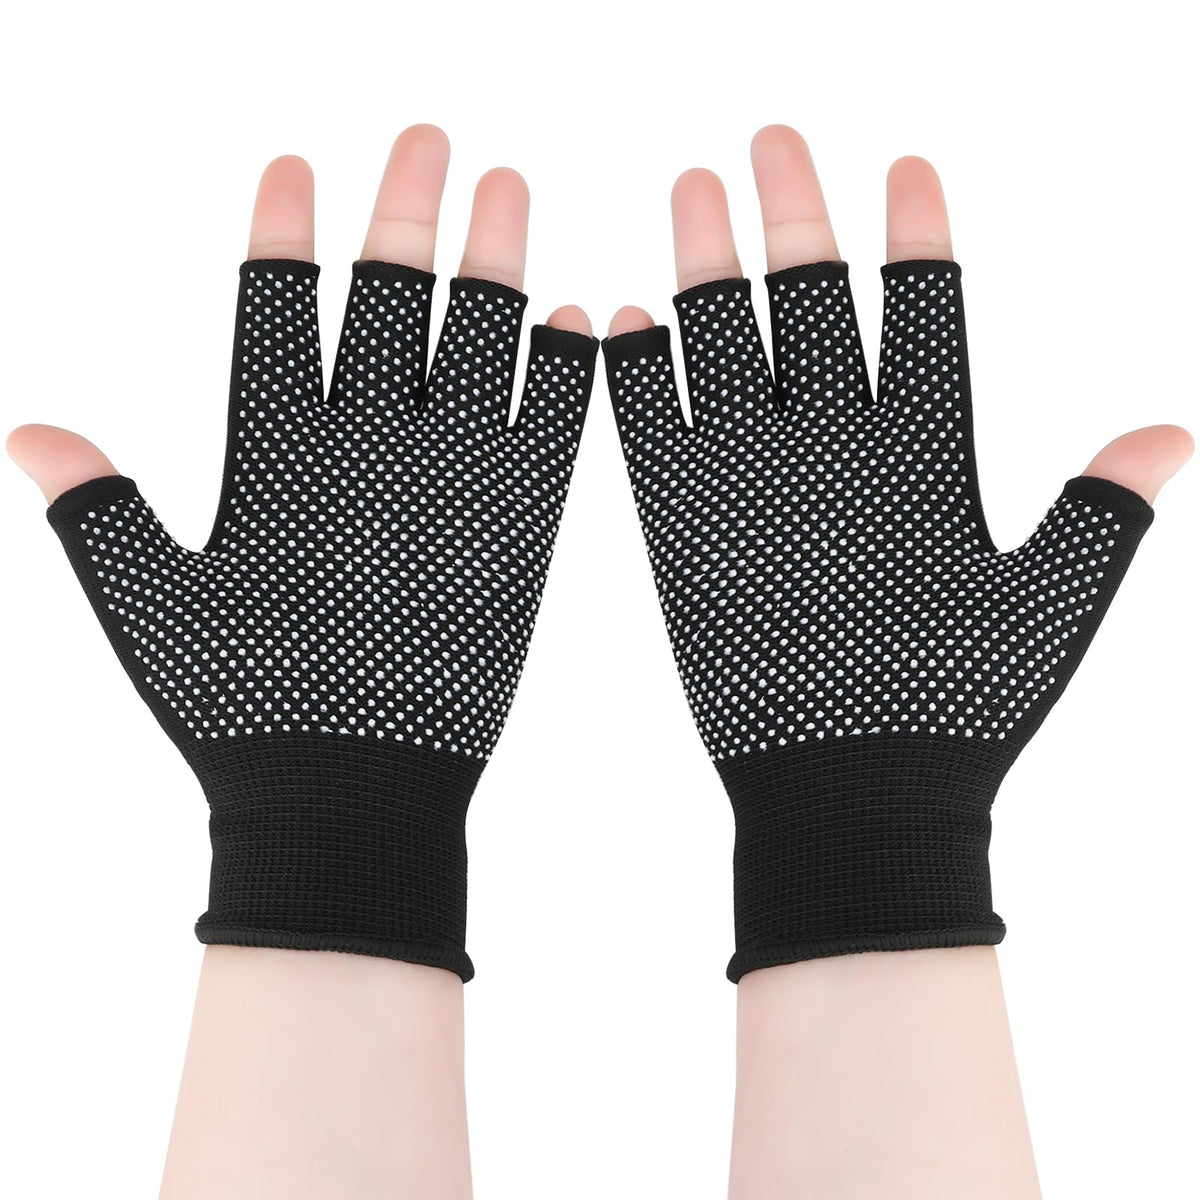 Black Fingerless Gloves for Man and Women Non Slip Breathable Nylon Half Finger Gloves Shock-Absorbing Driving Cycling Motorcycle Bike Gloves Hiking Climbing for Outdoor Sports Accessions